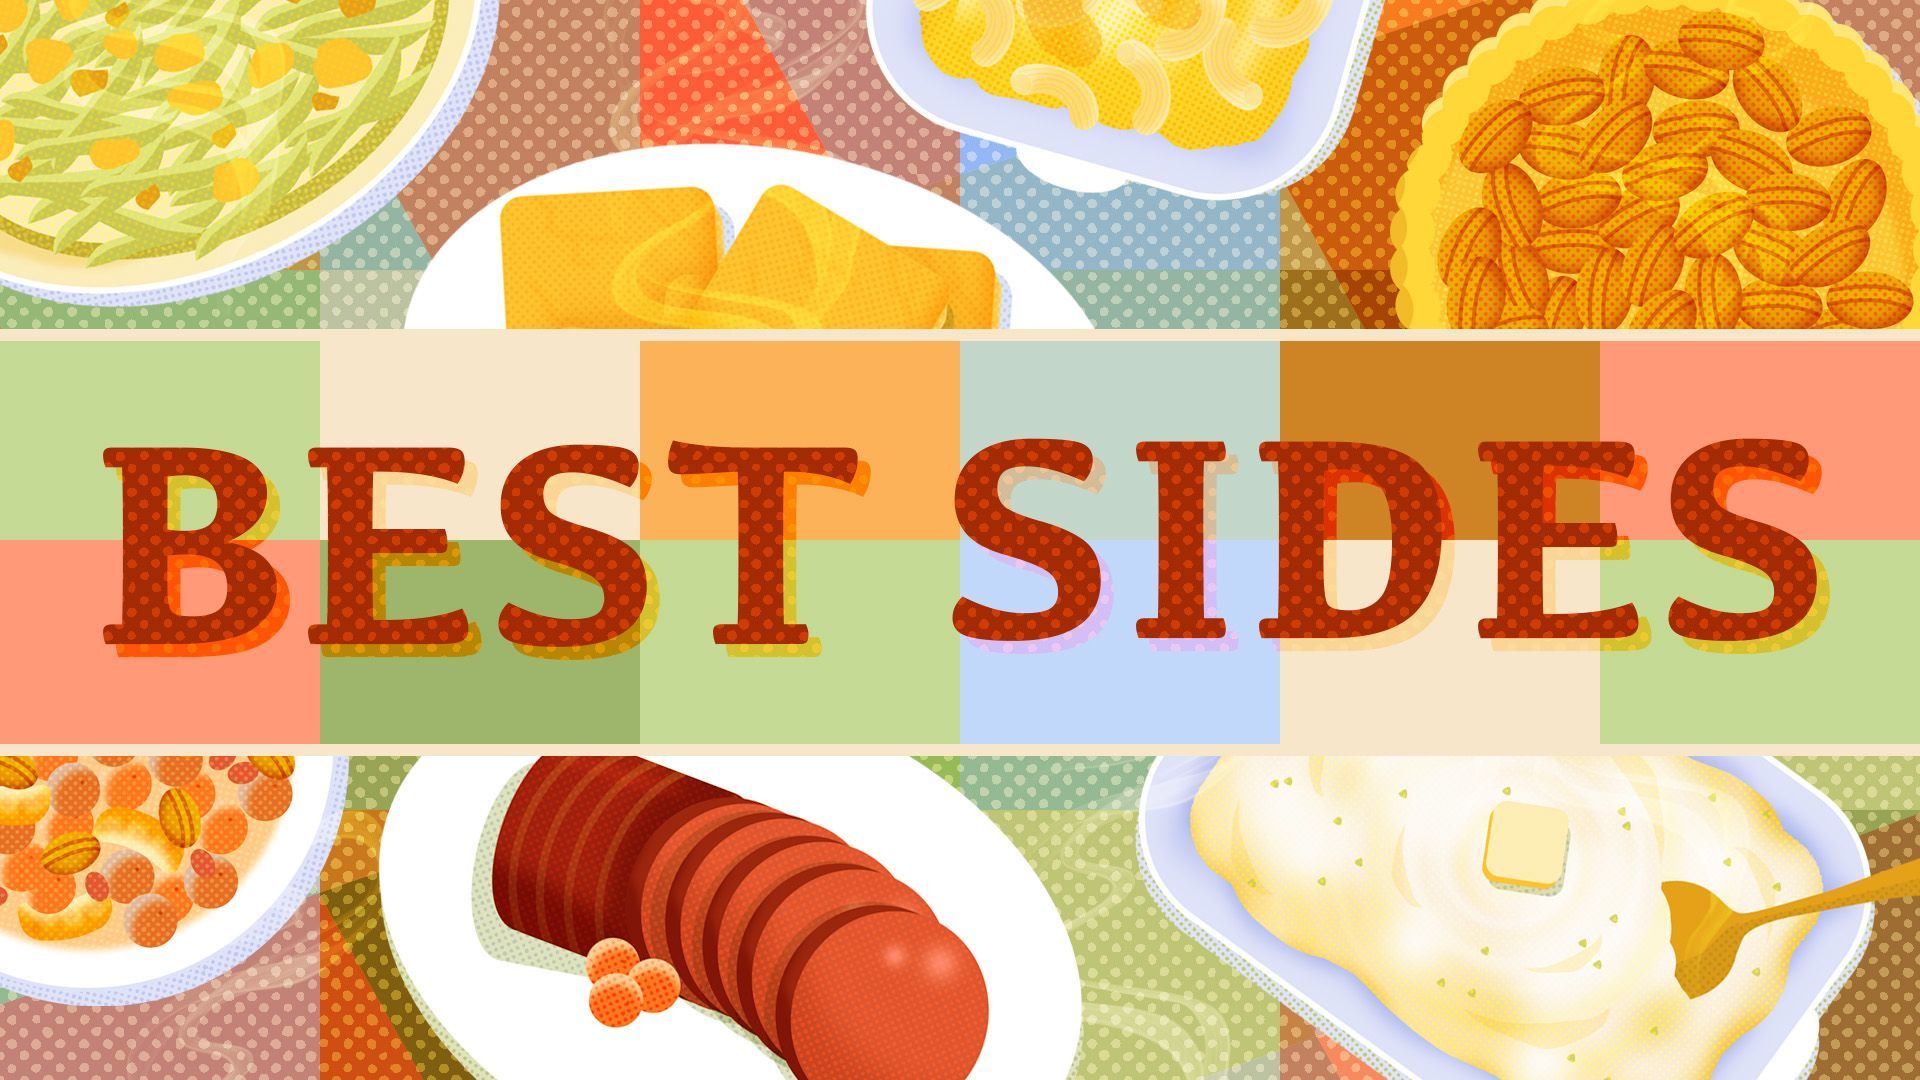 Illustration of thanksgiving side dishes on a checkered background with the words "Best Sides" in the middle